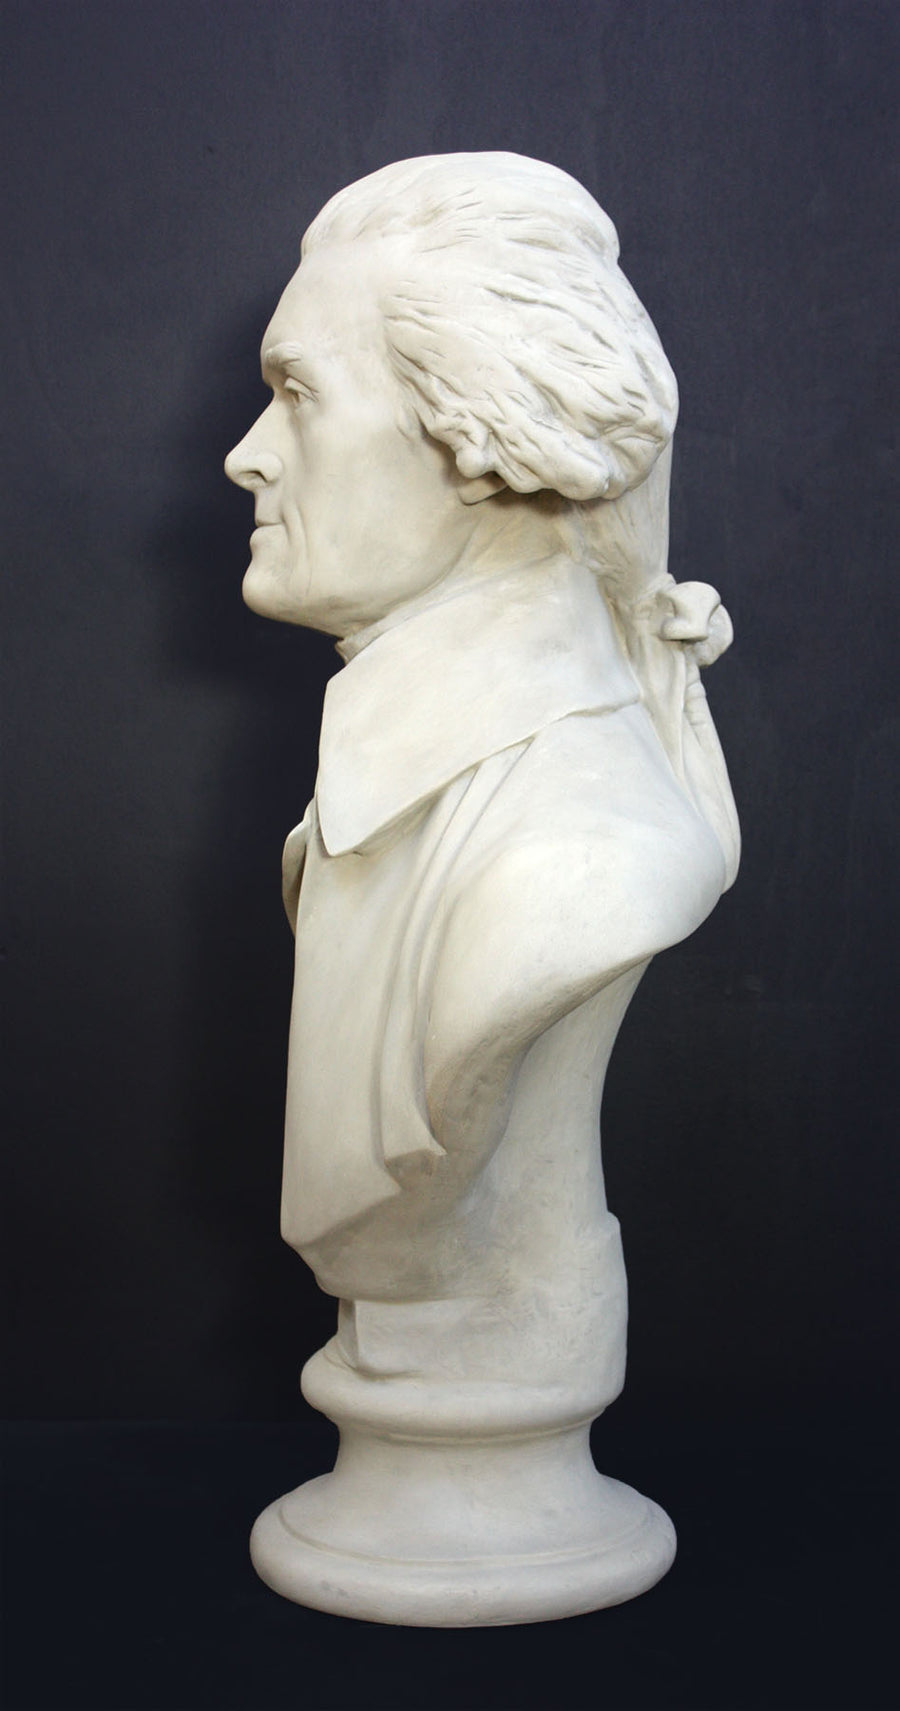 Photo of plaster cast bust sculpture of man with coat and neckerchief, namely Thomas Jefferson, with dark gray background